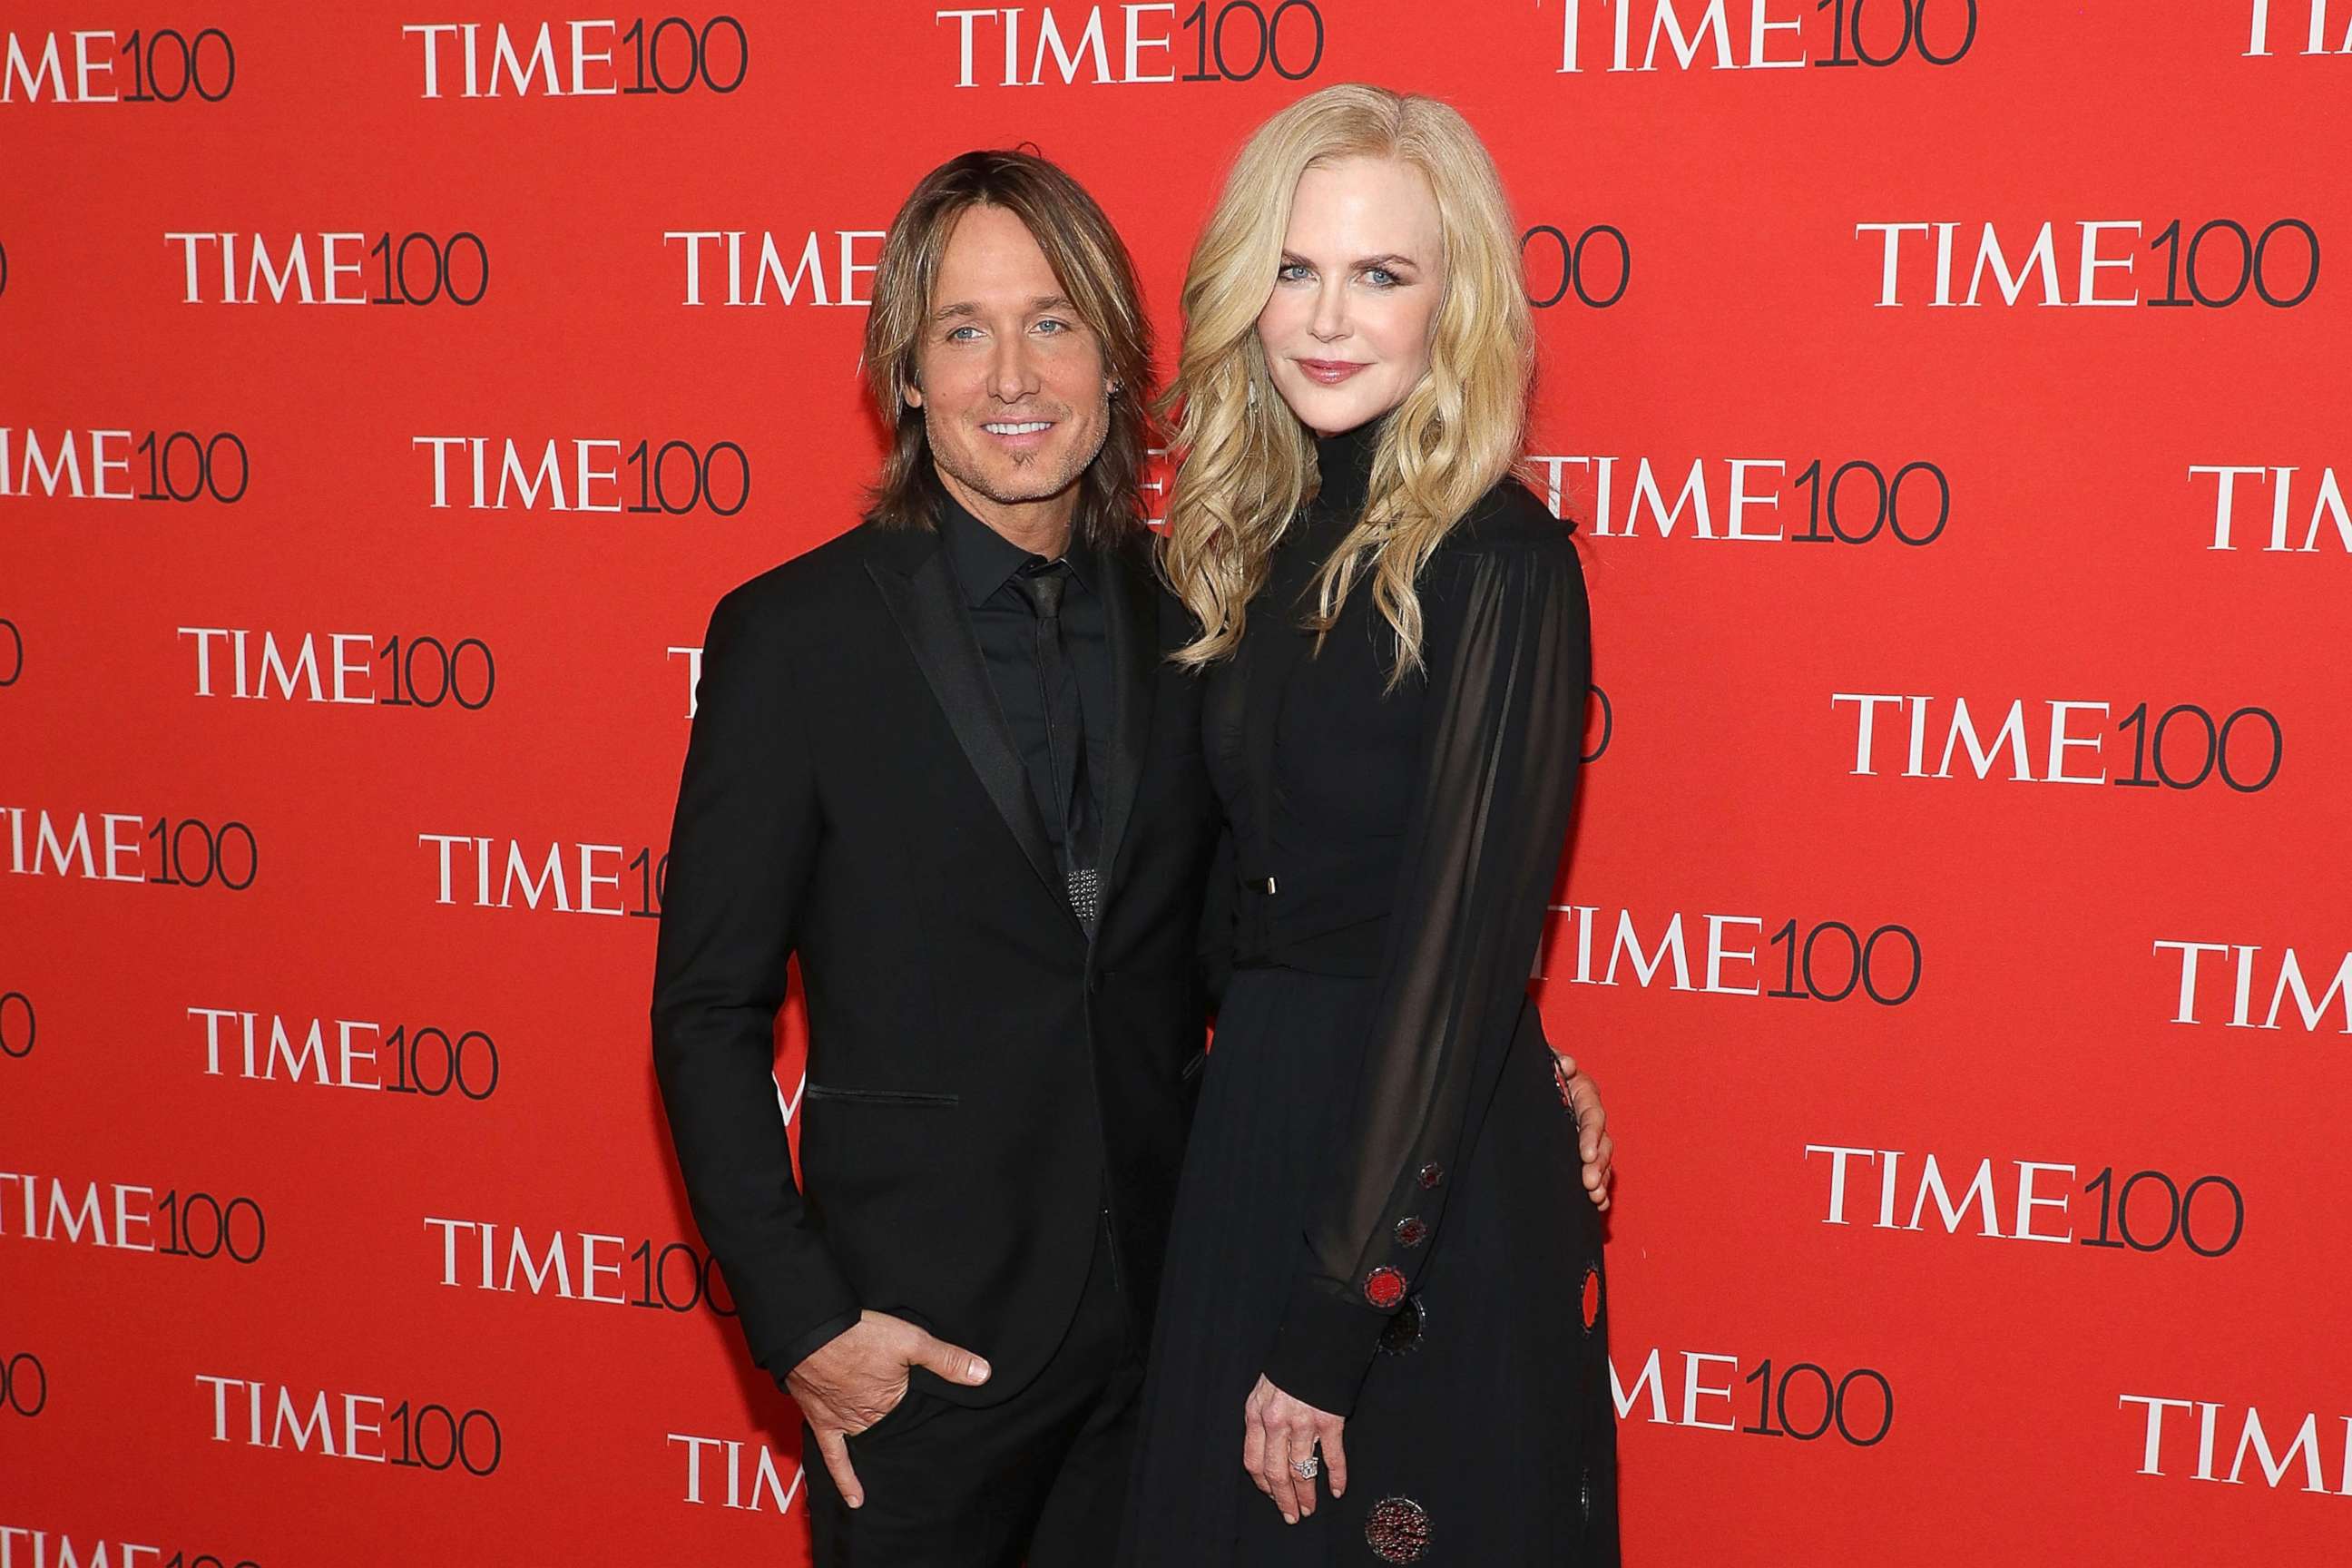 PHOTO: Keith Urban and Nicole Kidman attend the 2018 Time 100 Gala at Frederick P. Rose Hall, Jazz at Lincoln Center, April 24, 2018, in New York City.